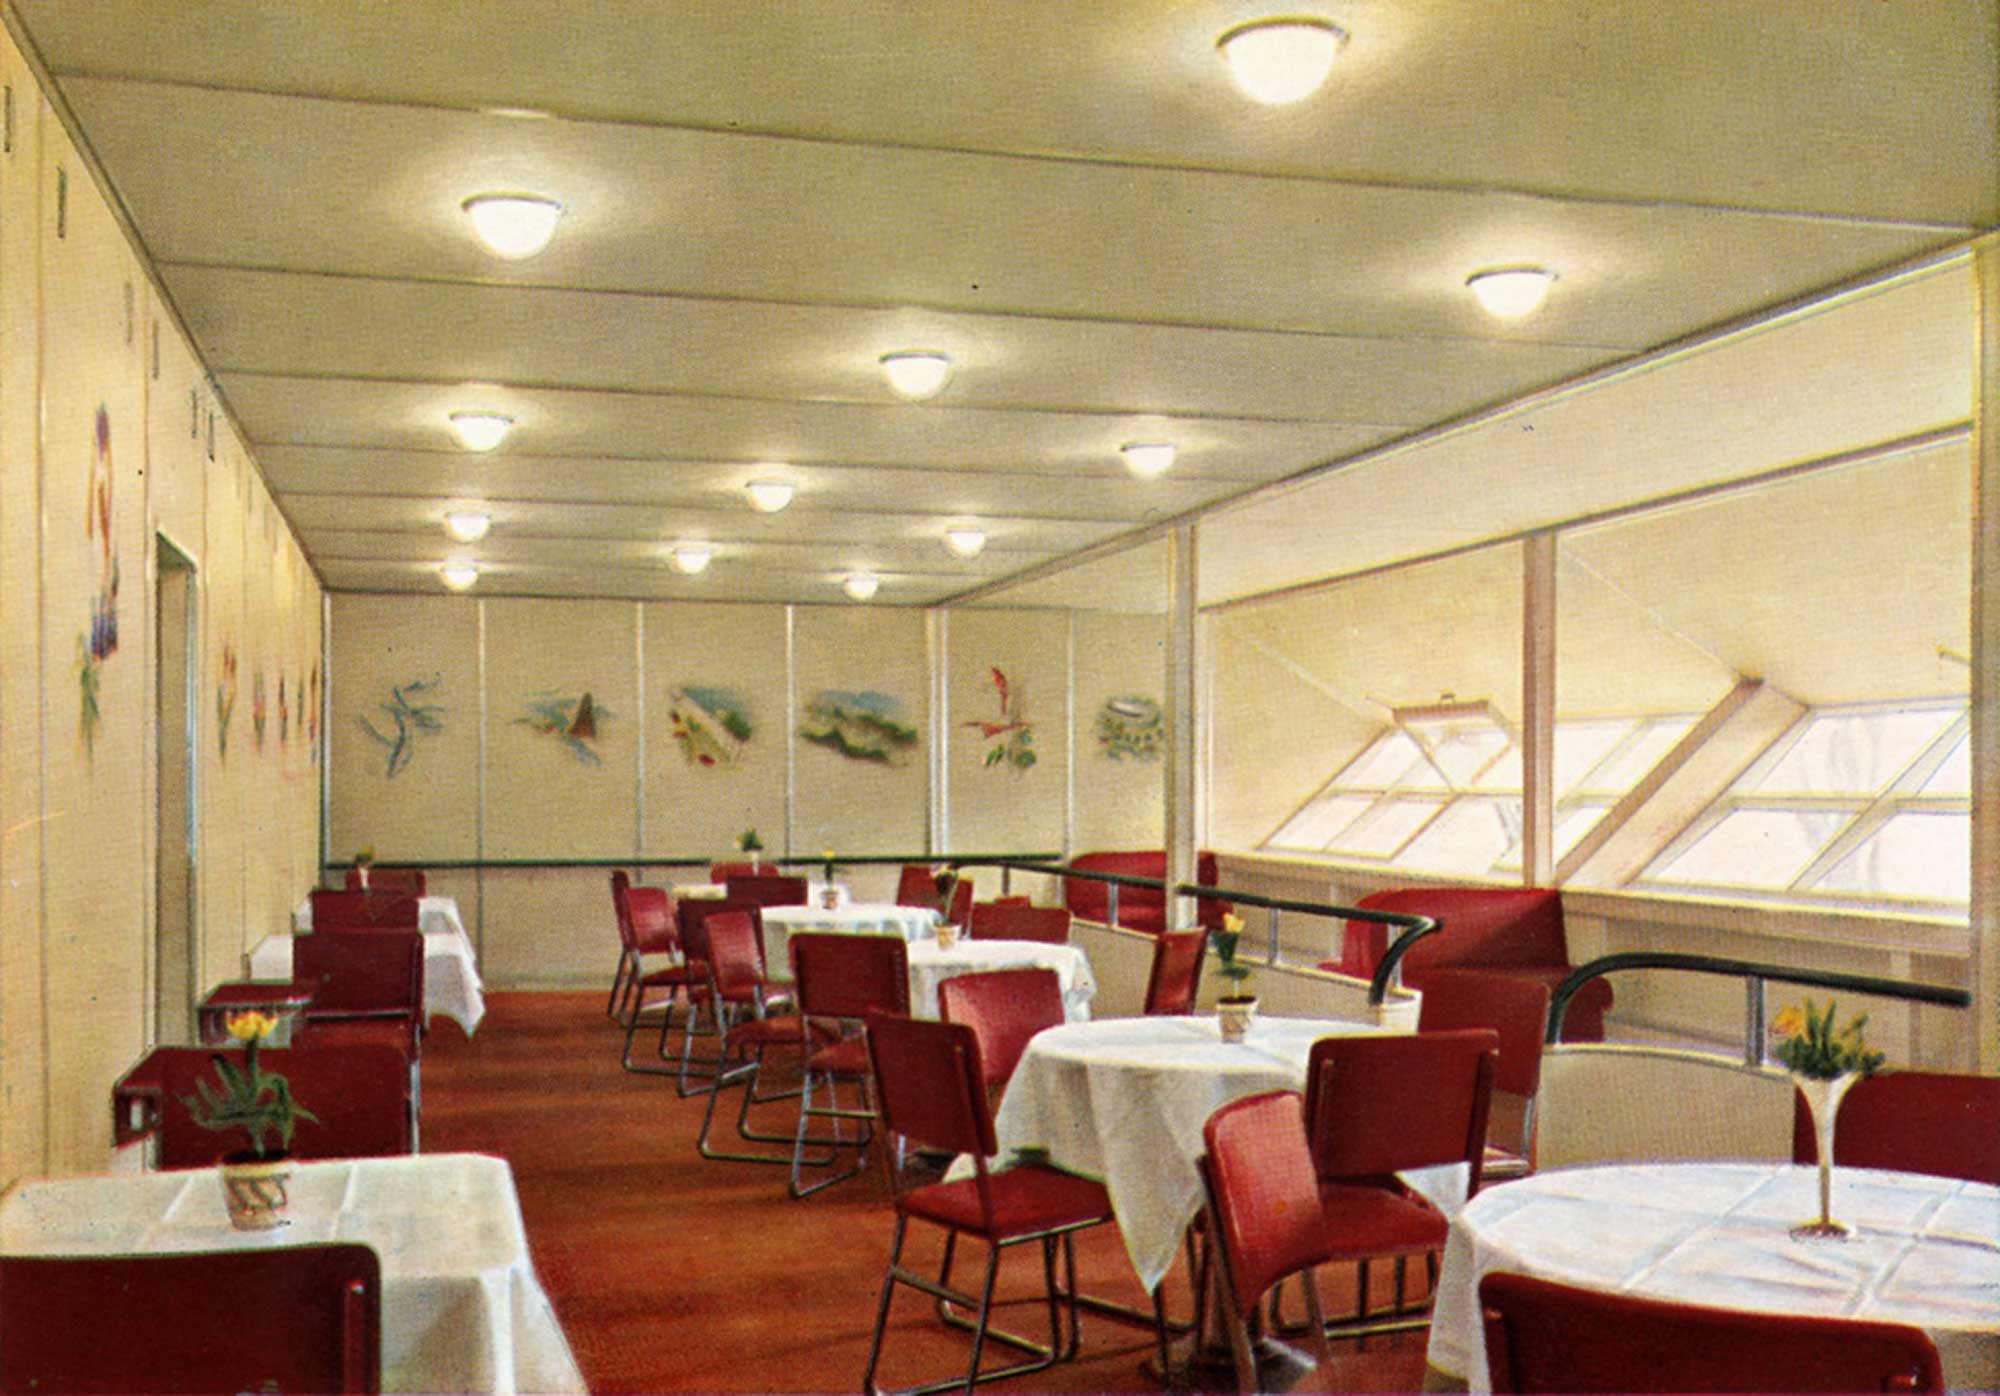 The dining room of the Hindenburg (German Federal Archives, <a href="https://creativecommons.org/licenses/by-sa/3.0/de/deed.en" target="_blank" rel="noreferrer noopener">CC BY-SA 3.0 de</a>)